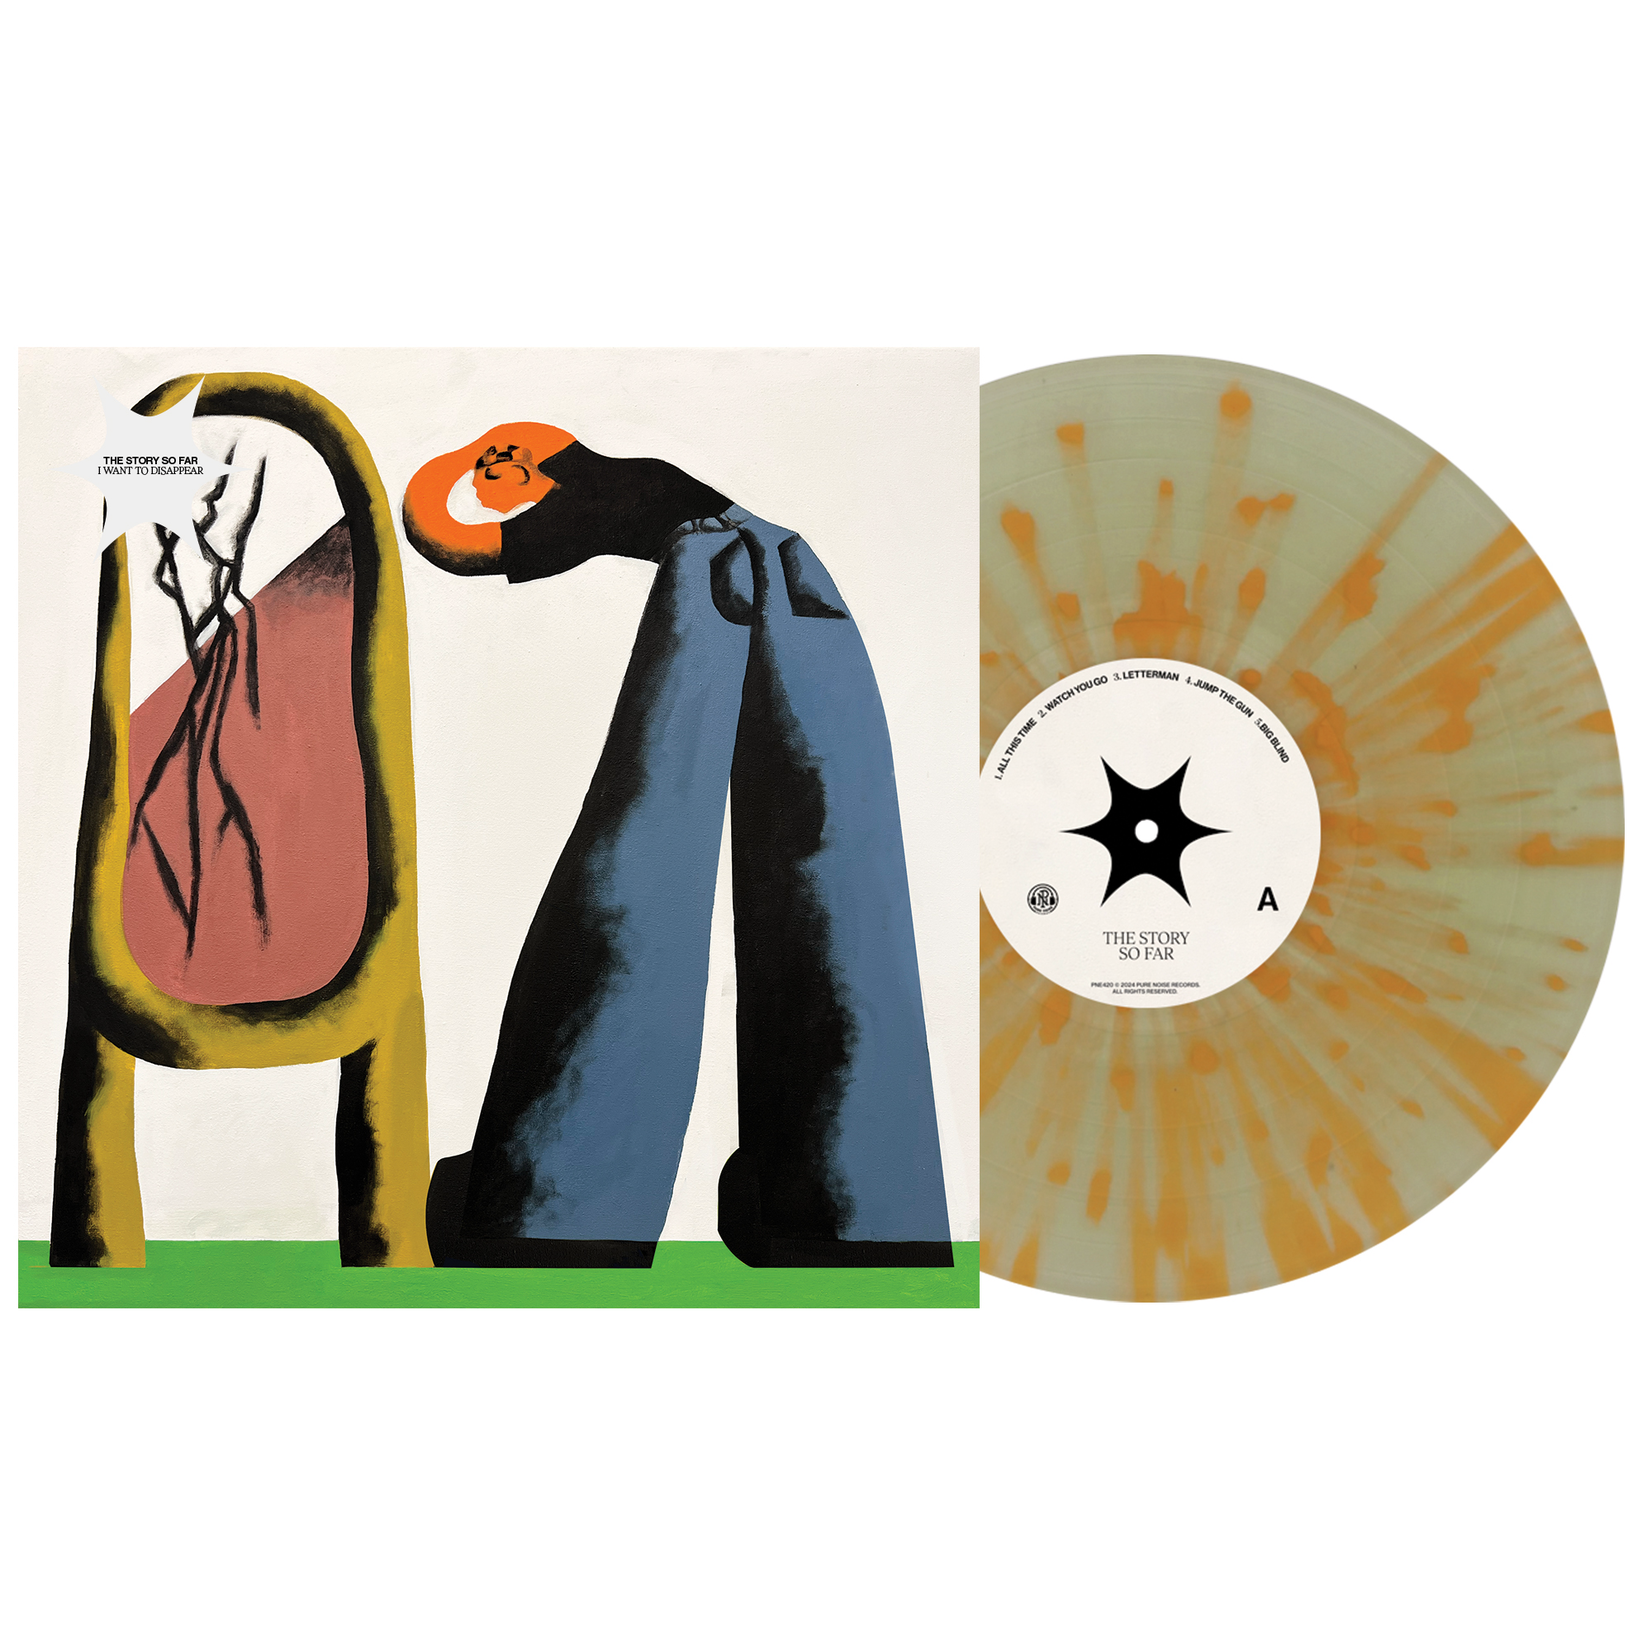 Pure Noise PRE-ORDER Story So Far - I Want To Disappear (LP) [Orange Splatter]